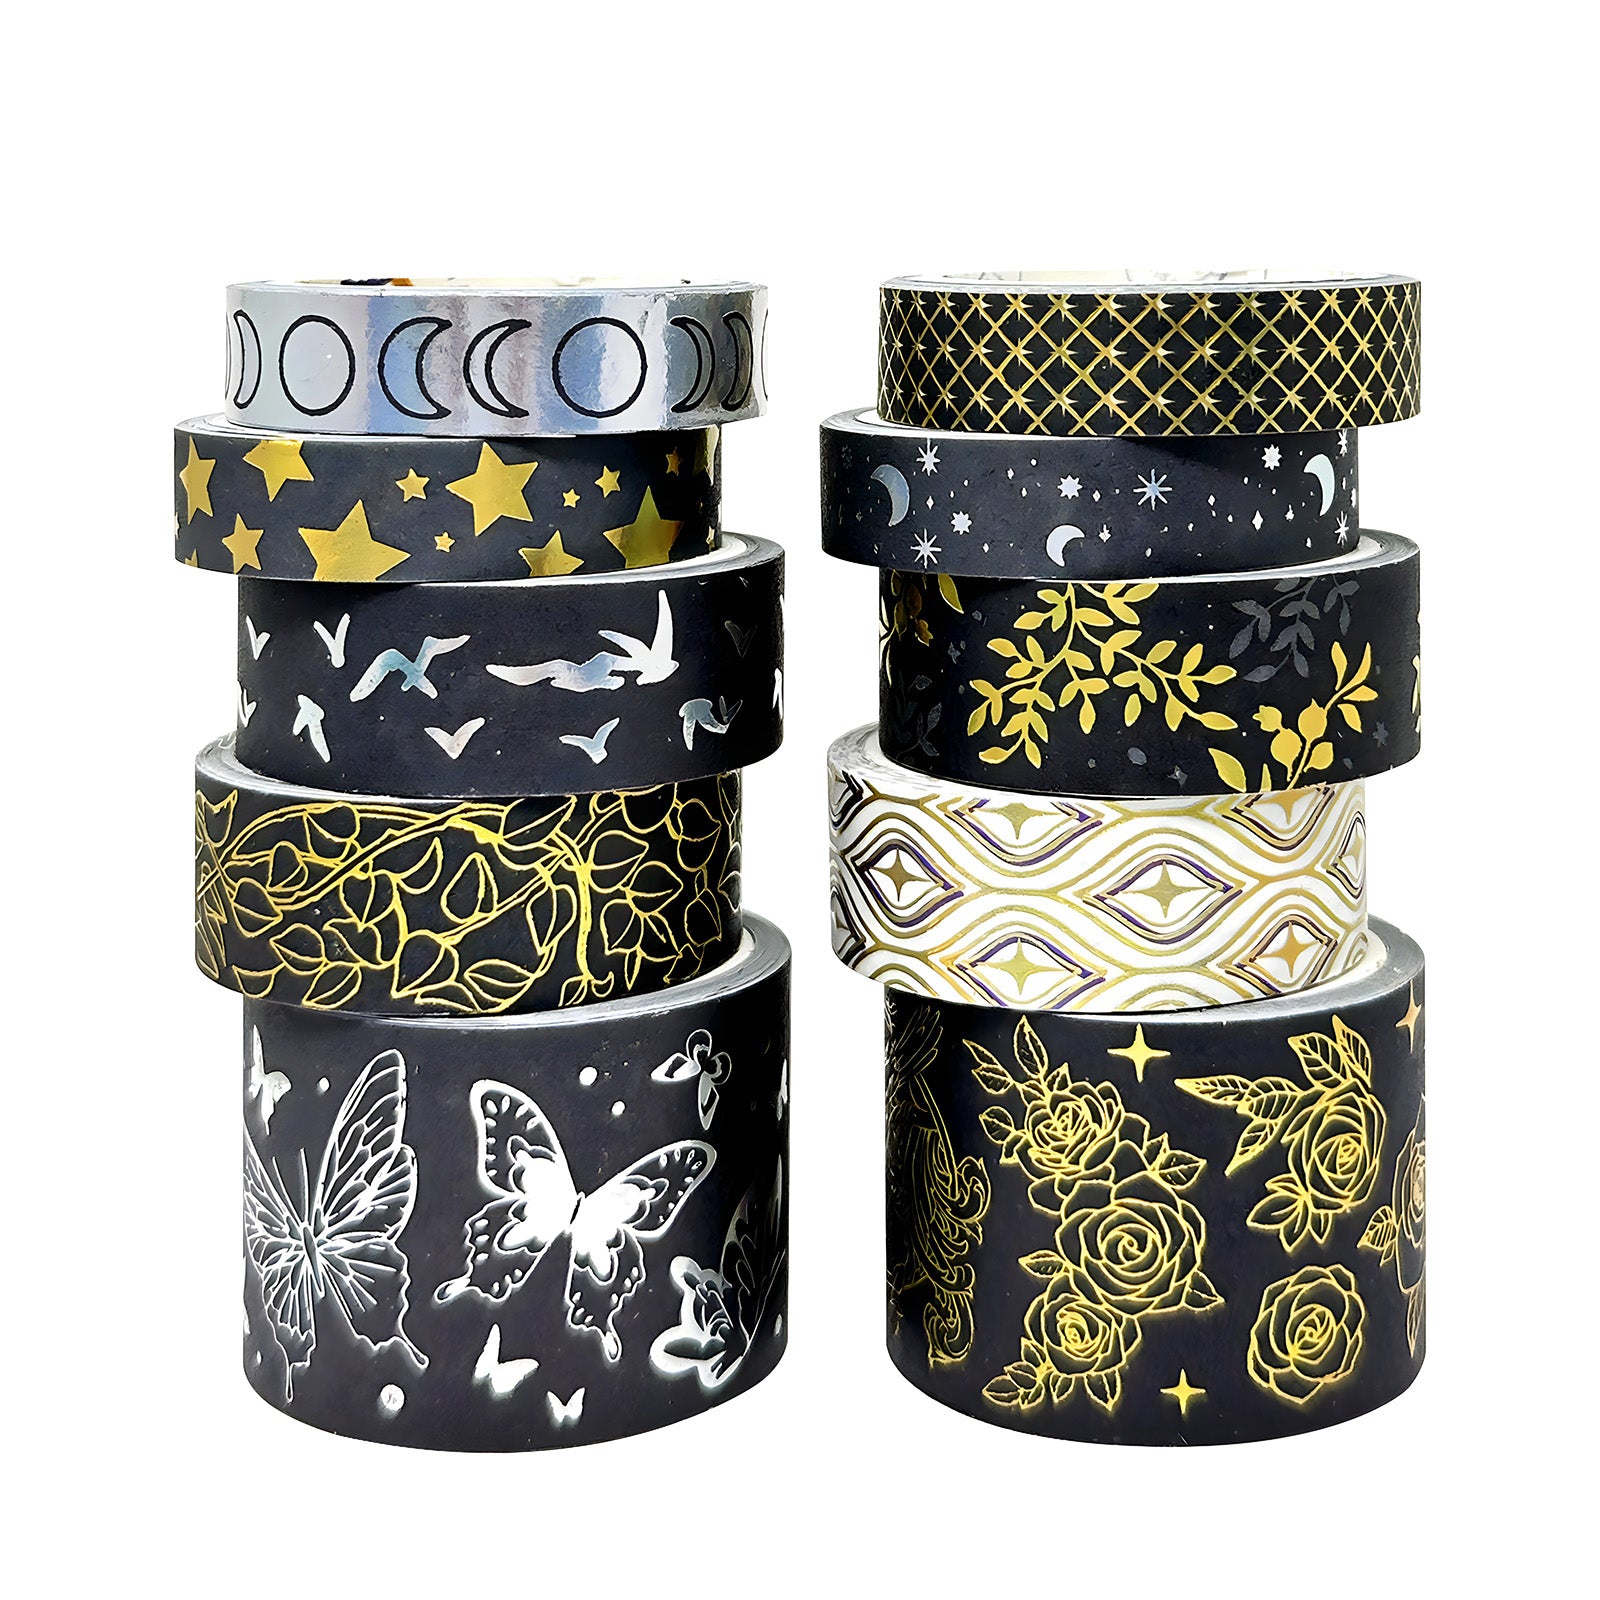 Wrapables Nature Metallic Foil Washi Tape Set for Scrapbooking, Stationery, Diary, Card Making, (8 Rolls), Cool Blue Floral